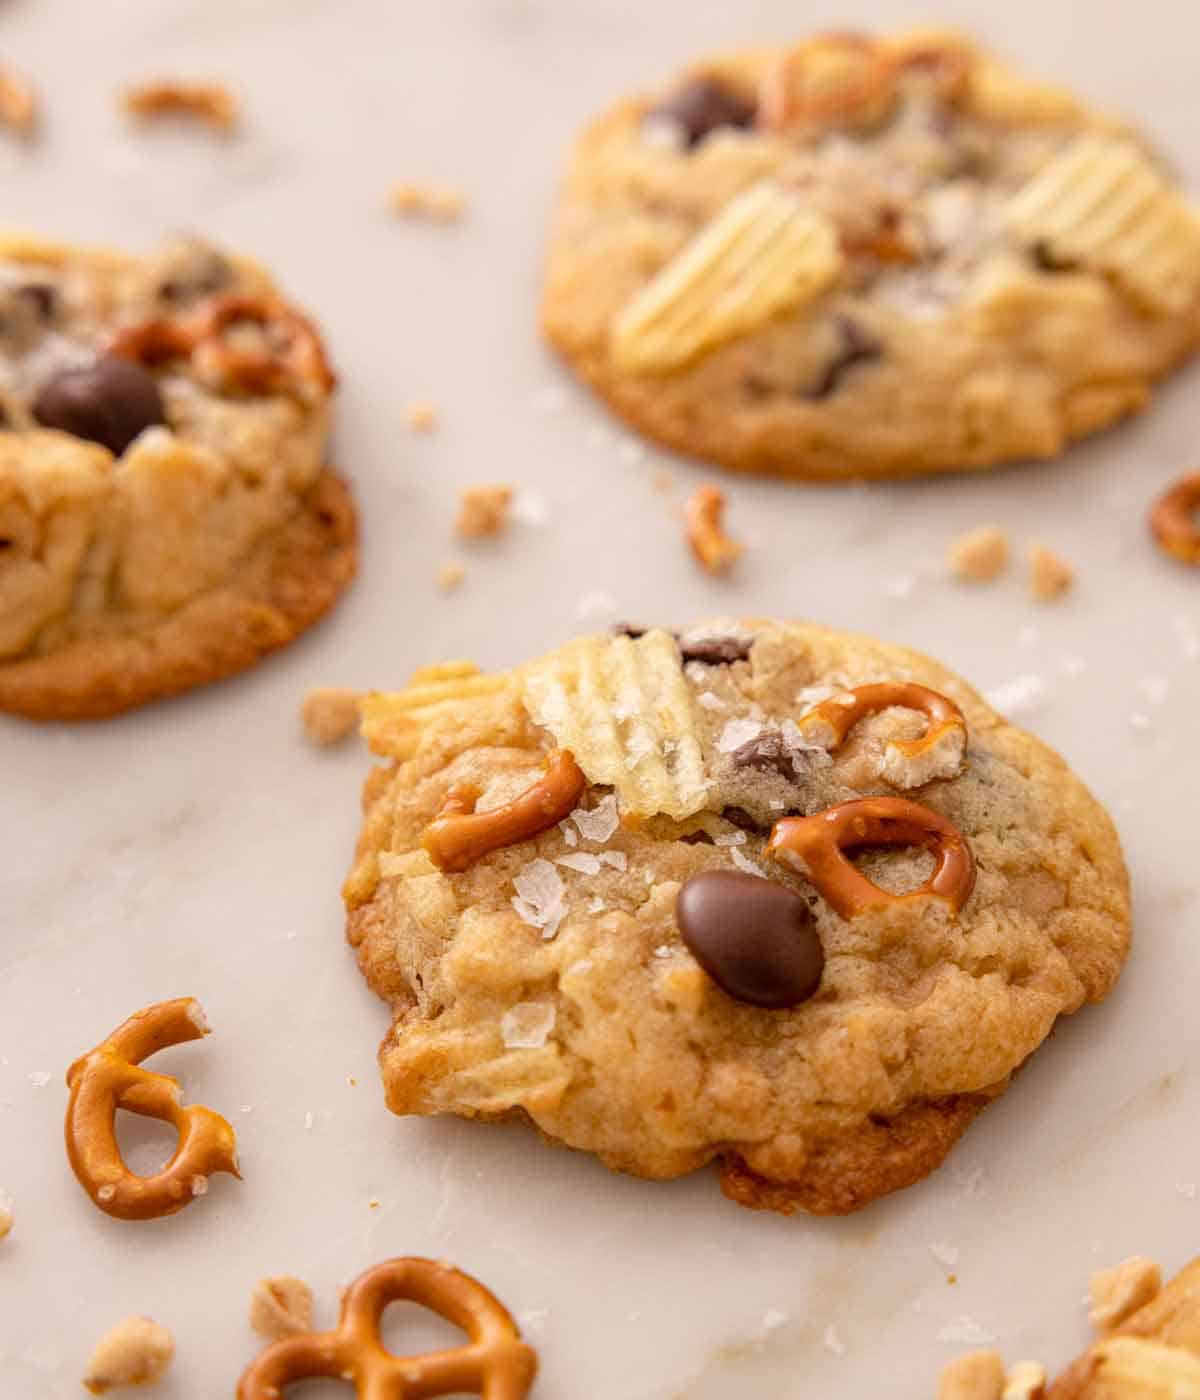 Angled view of kitchen sink cookies with one in focus in front with some crushed pretzels scattered around.